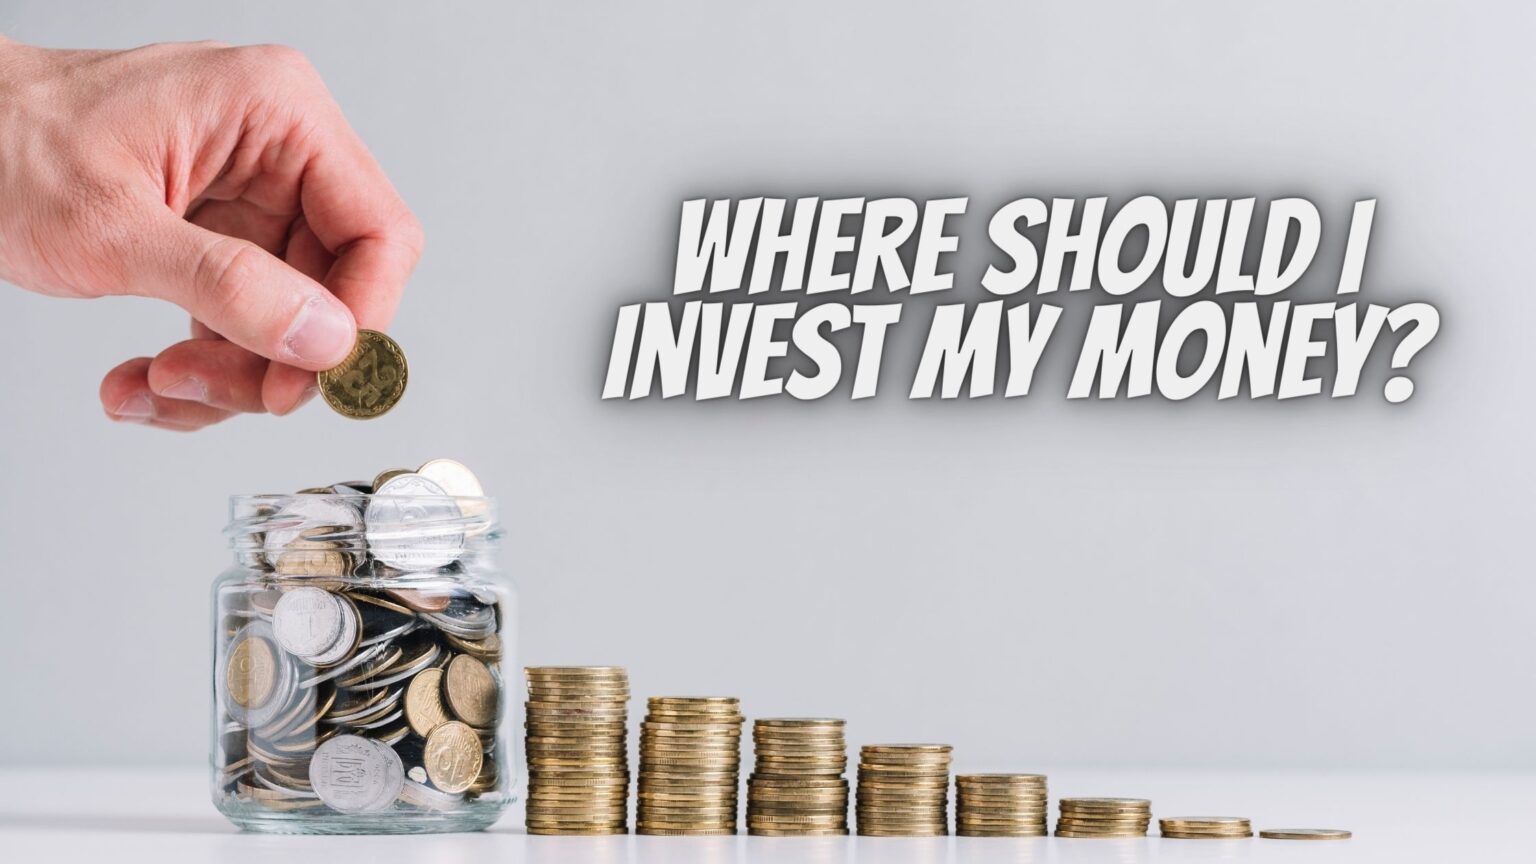 Best Short Term Investment Options Where Should I Invest My Money?